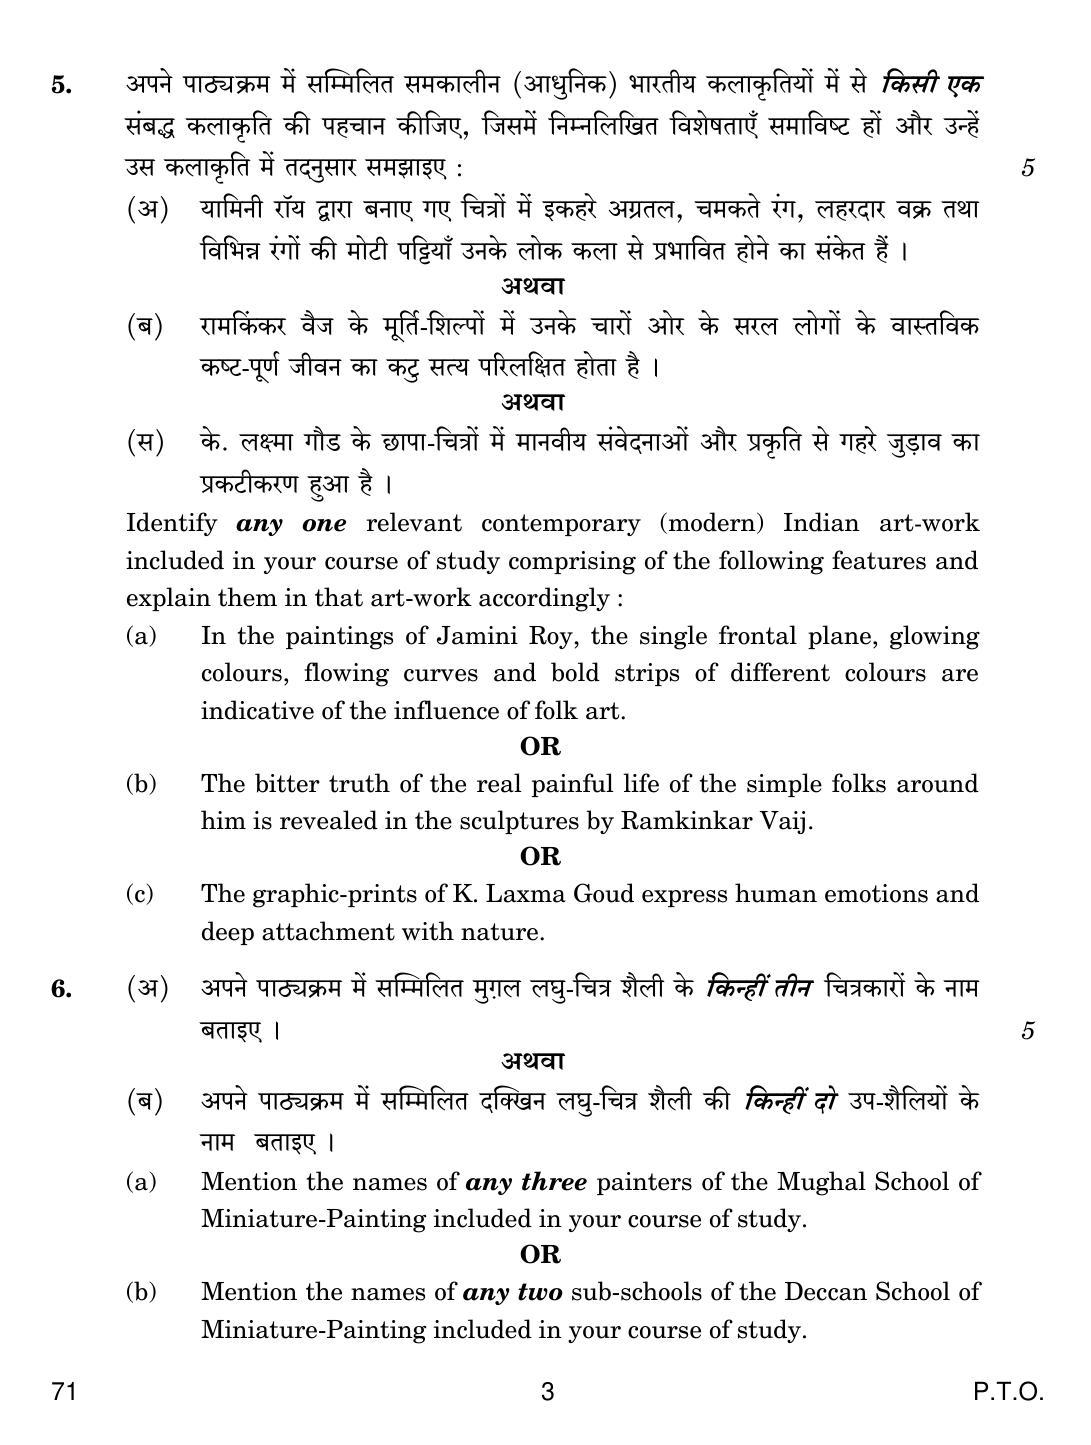 CBSE Class 12 71 PAINTING 2019 Compartment Question Paper - Page 3